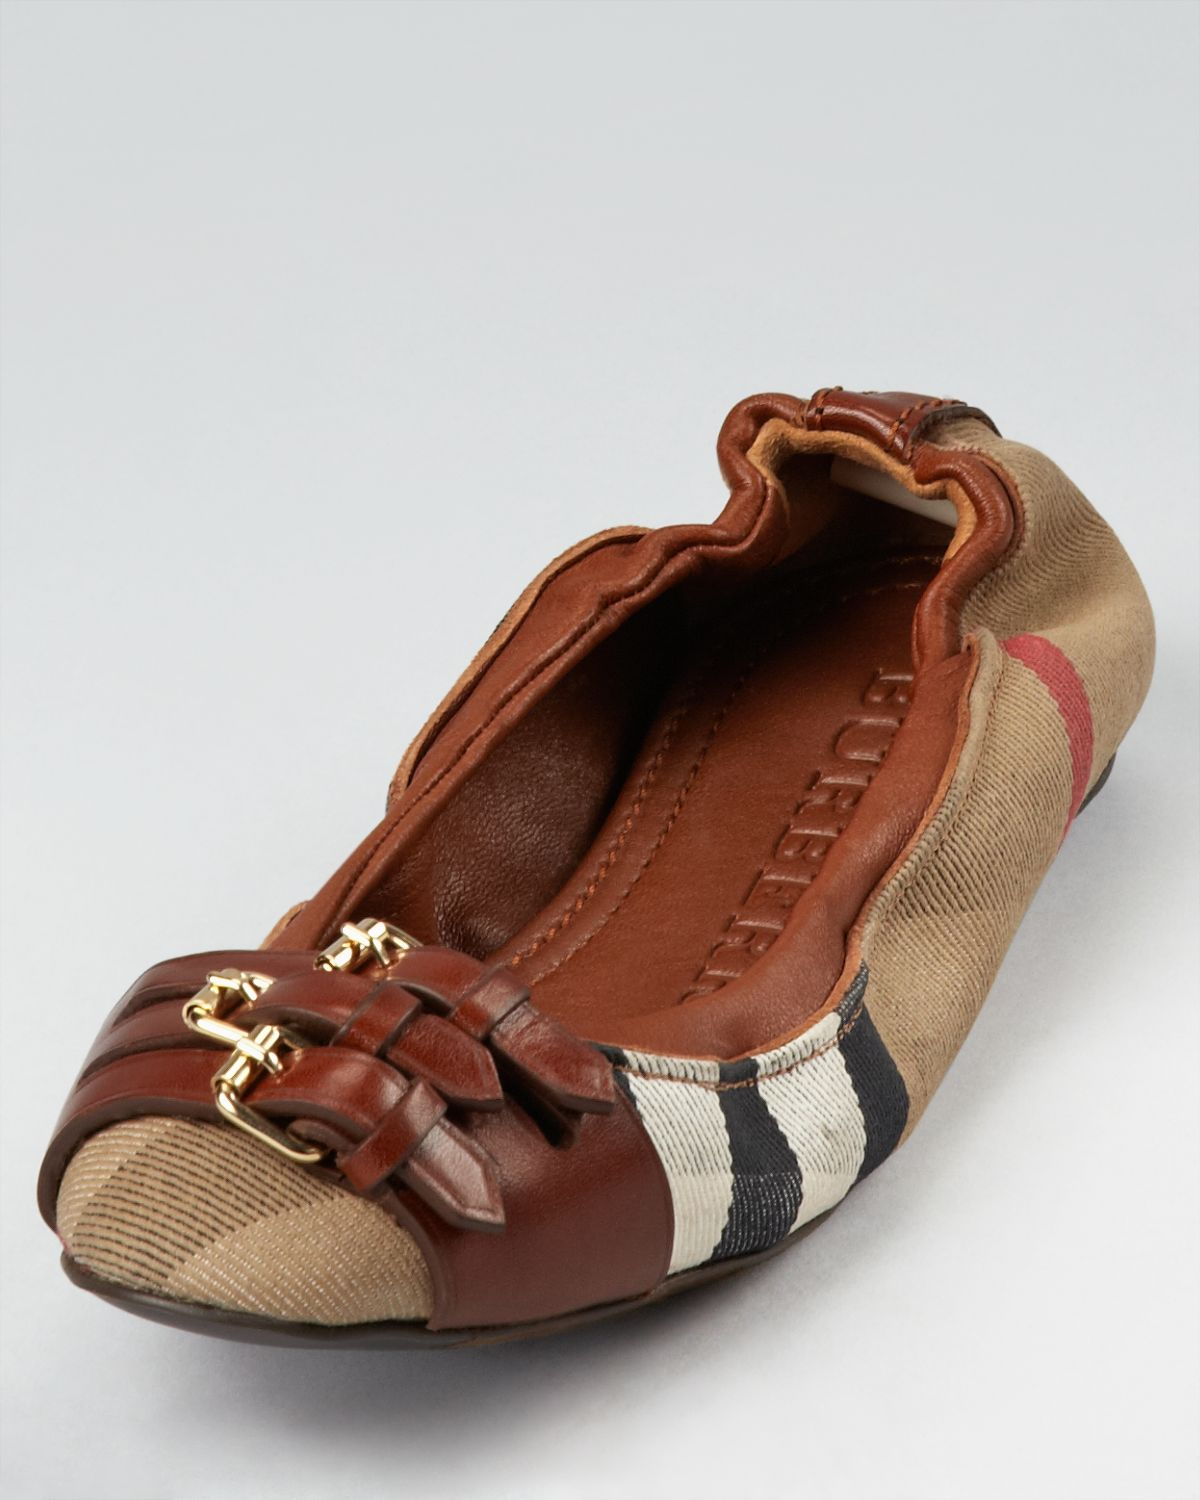 burberry slippers sale Online Shopping 